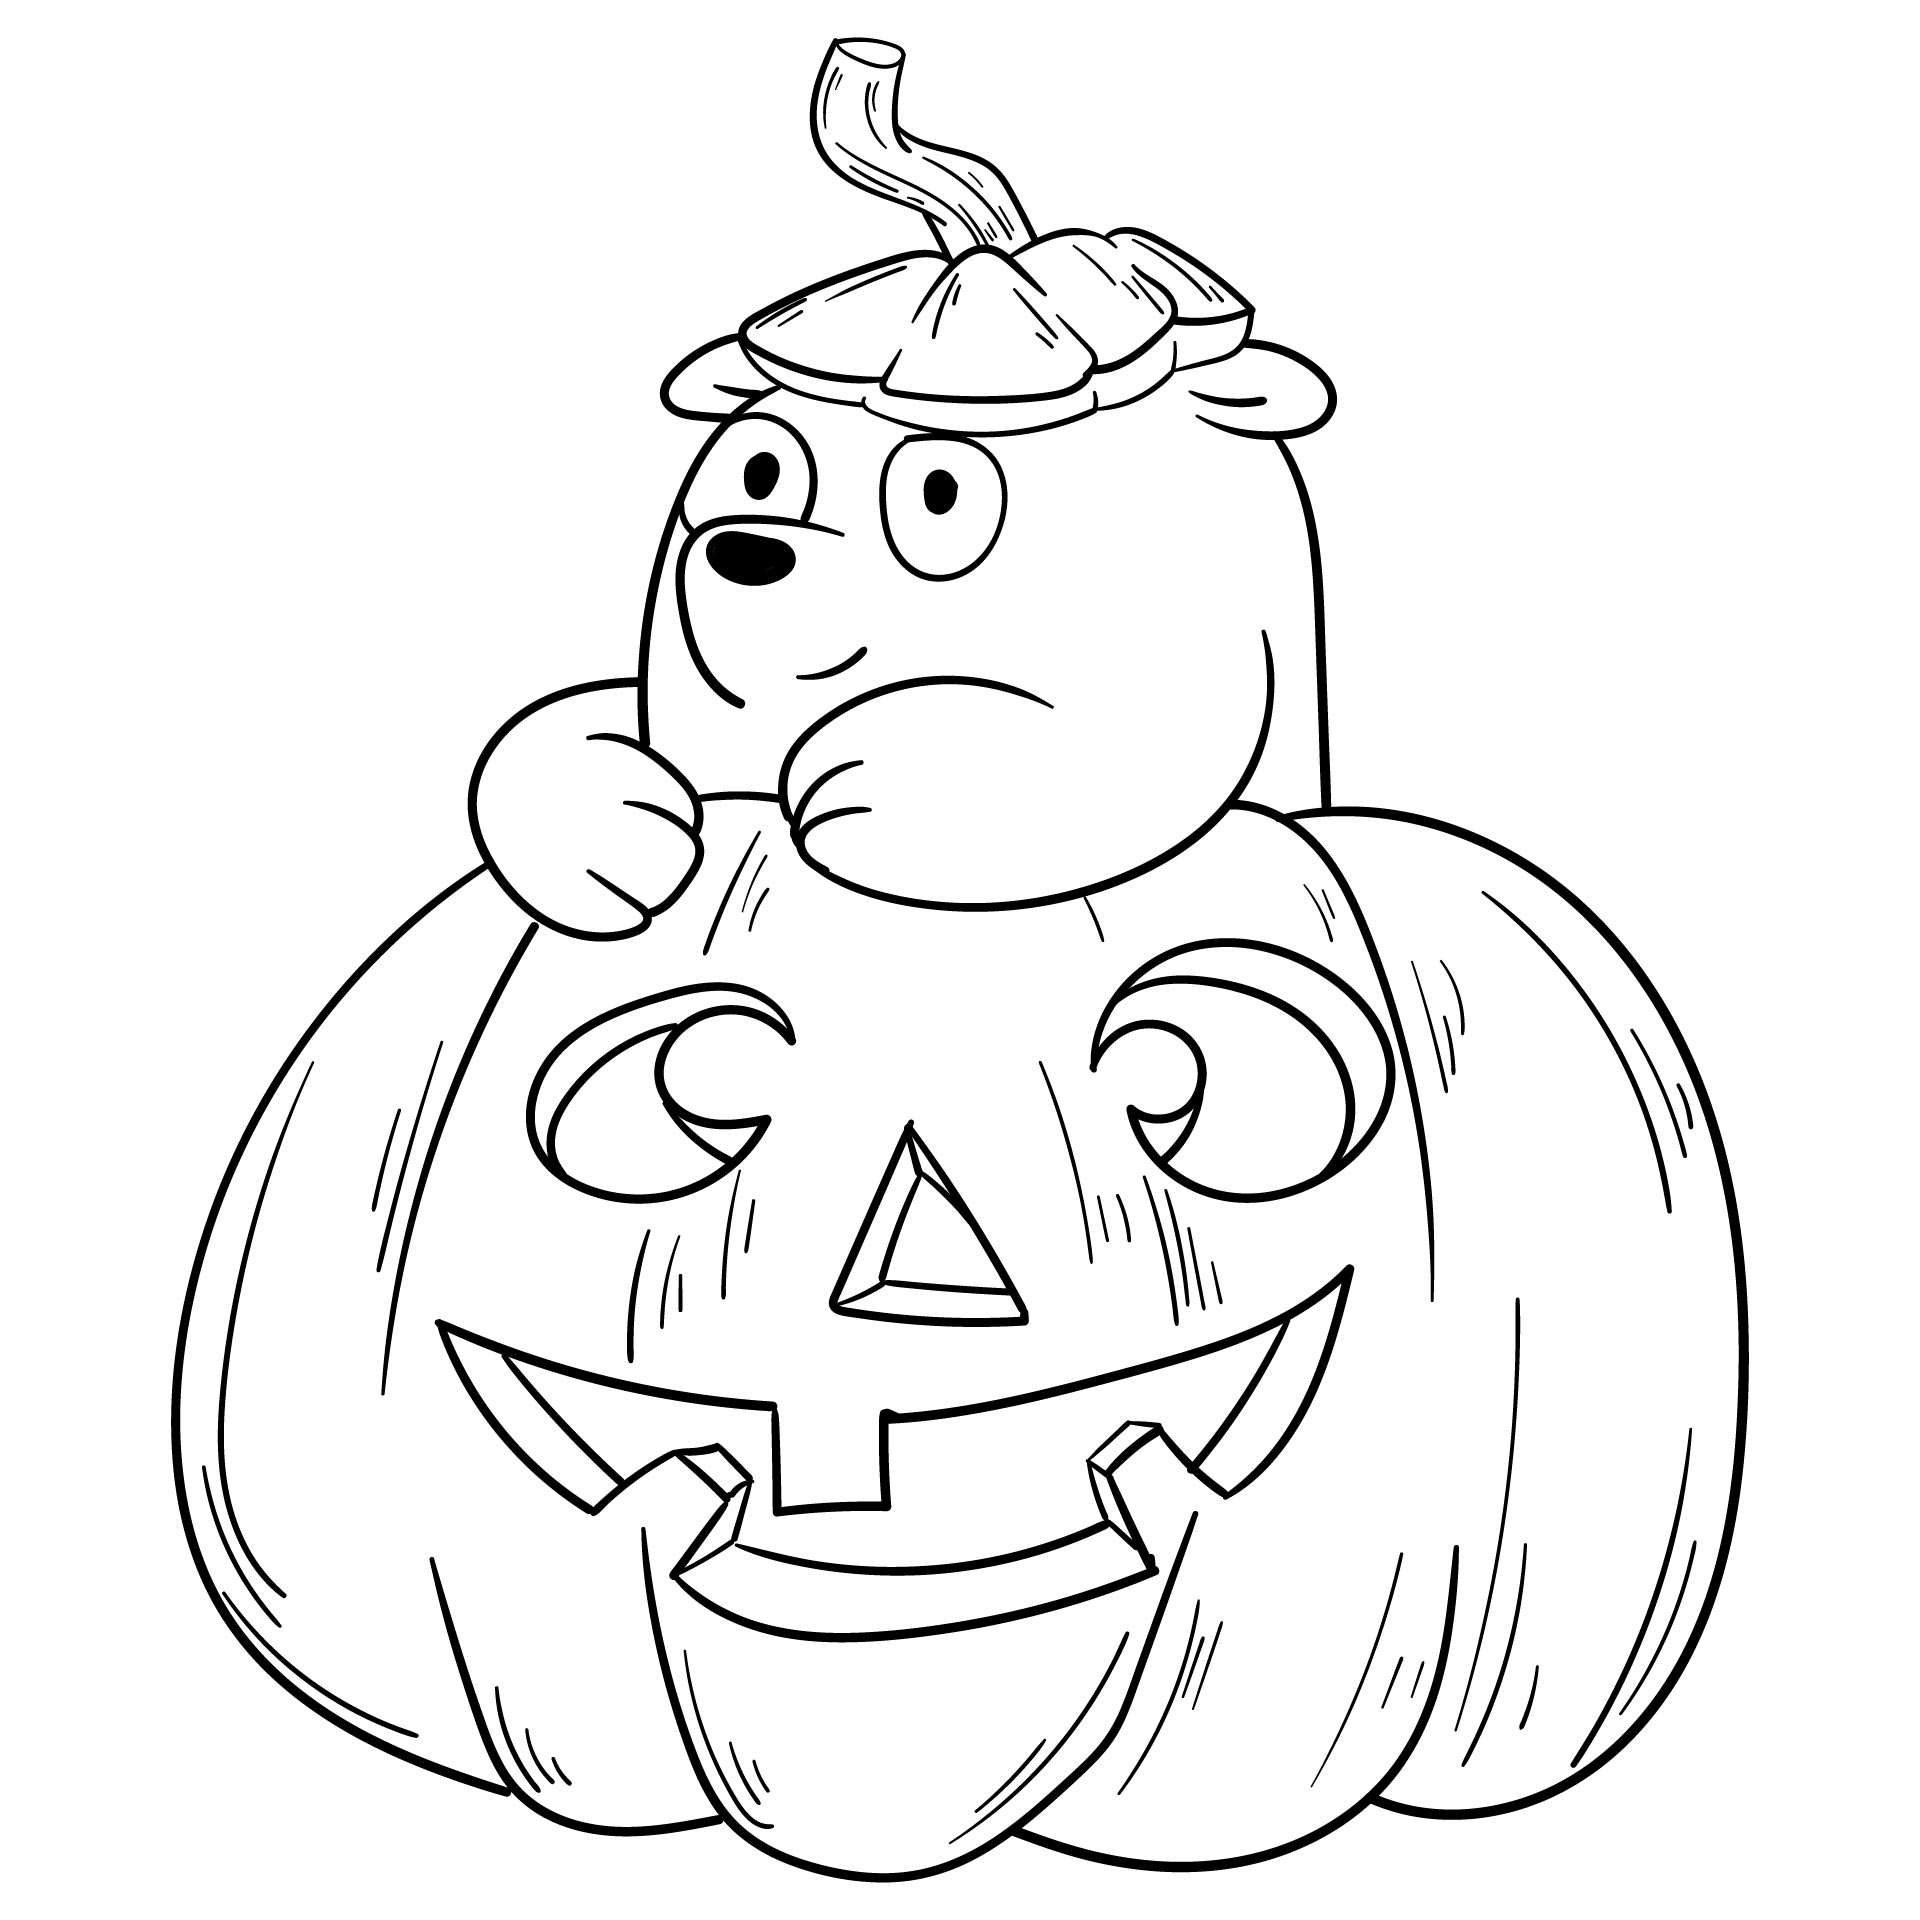 15-best-happy-halloween-printable-coloring-pages-pdf-for-free-at-printablee